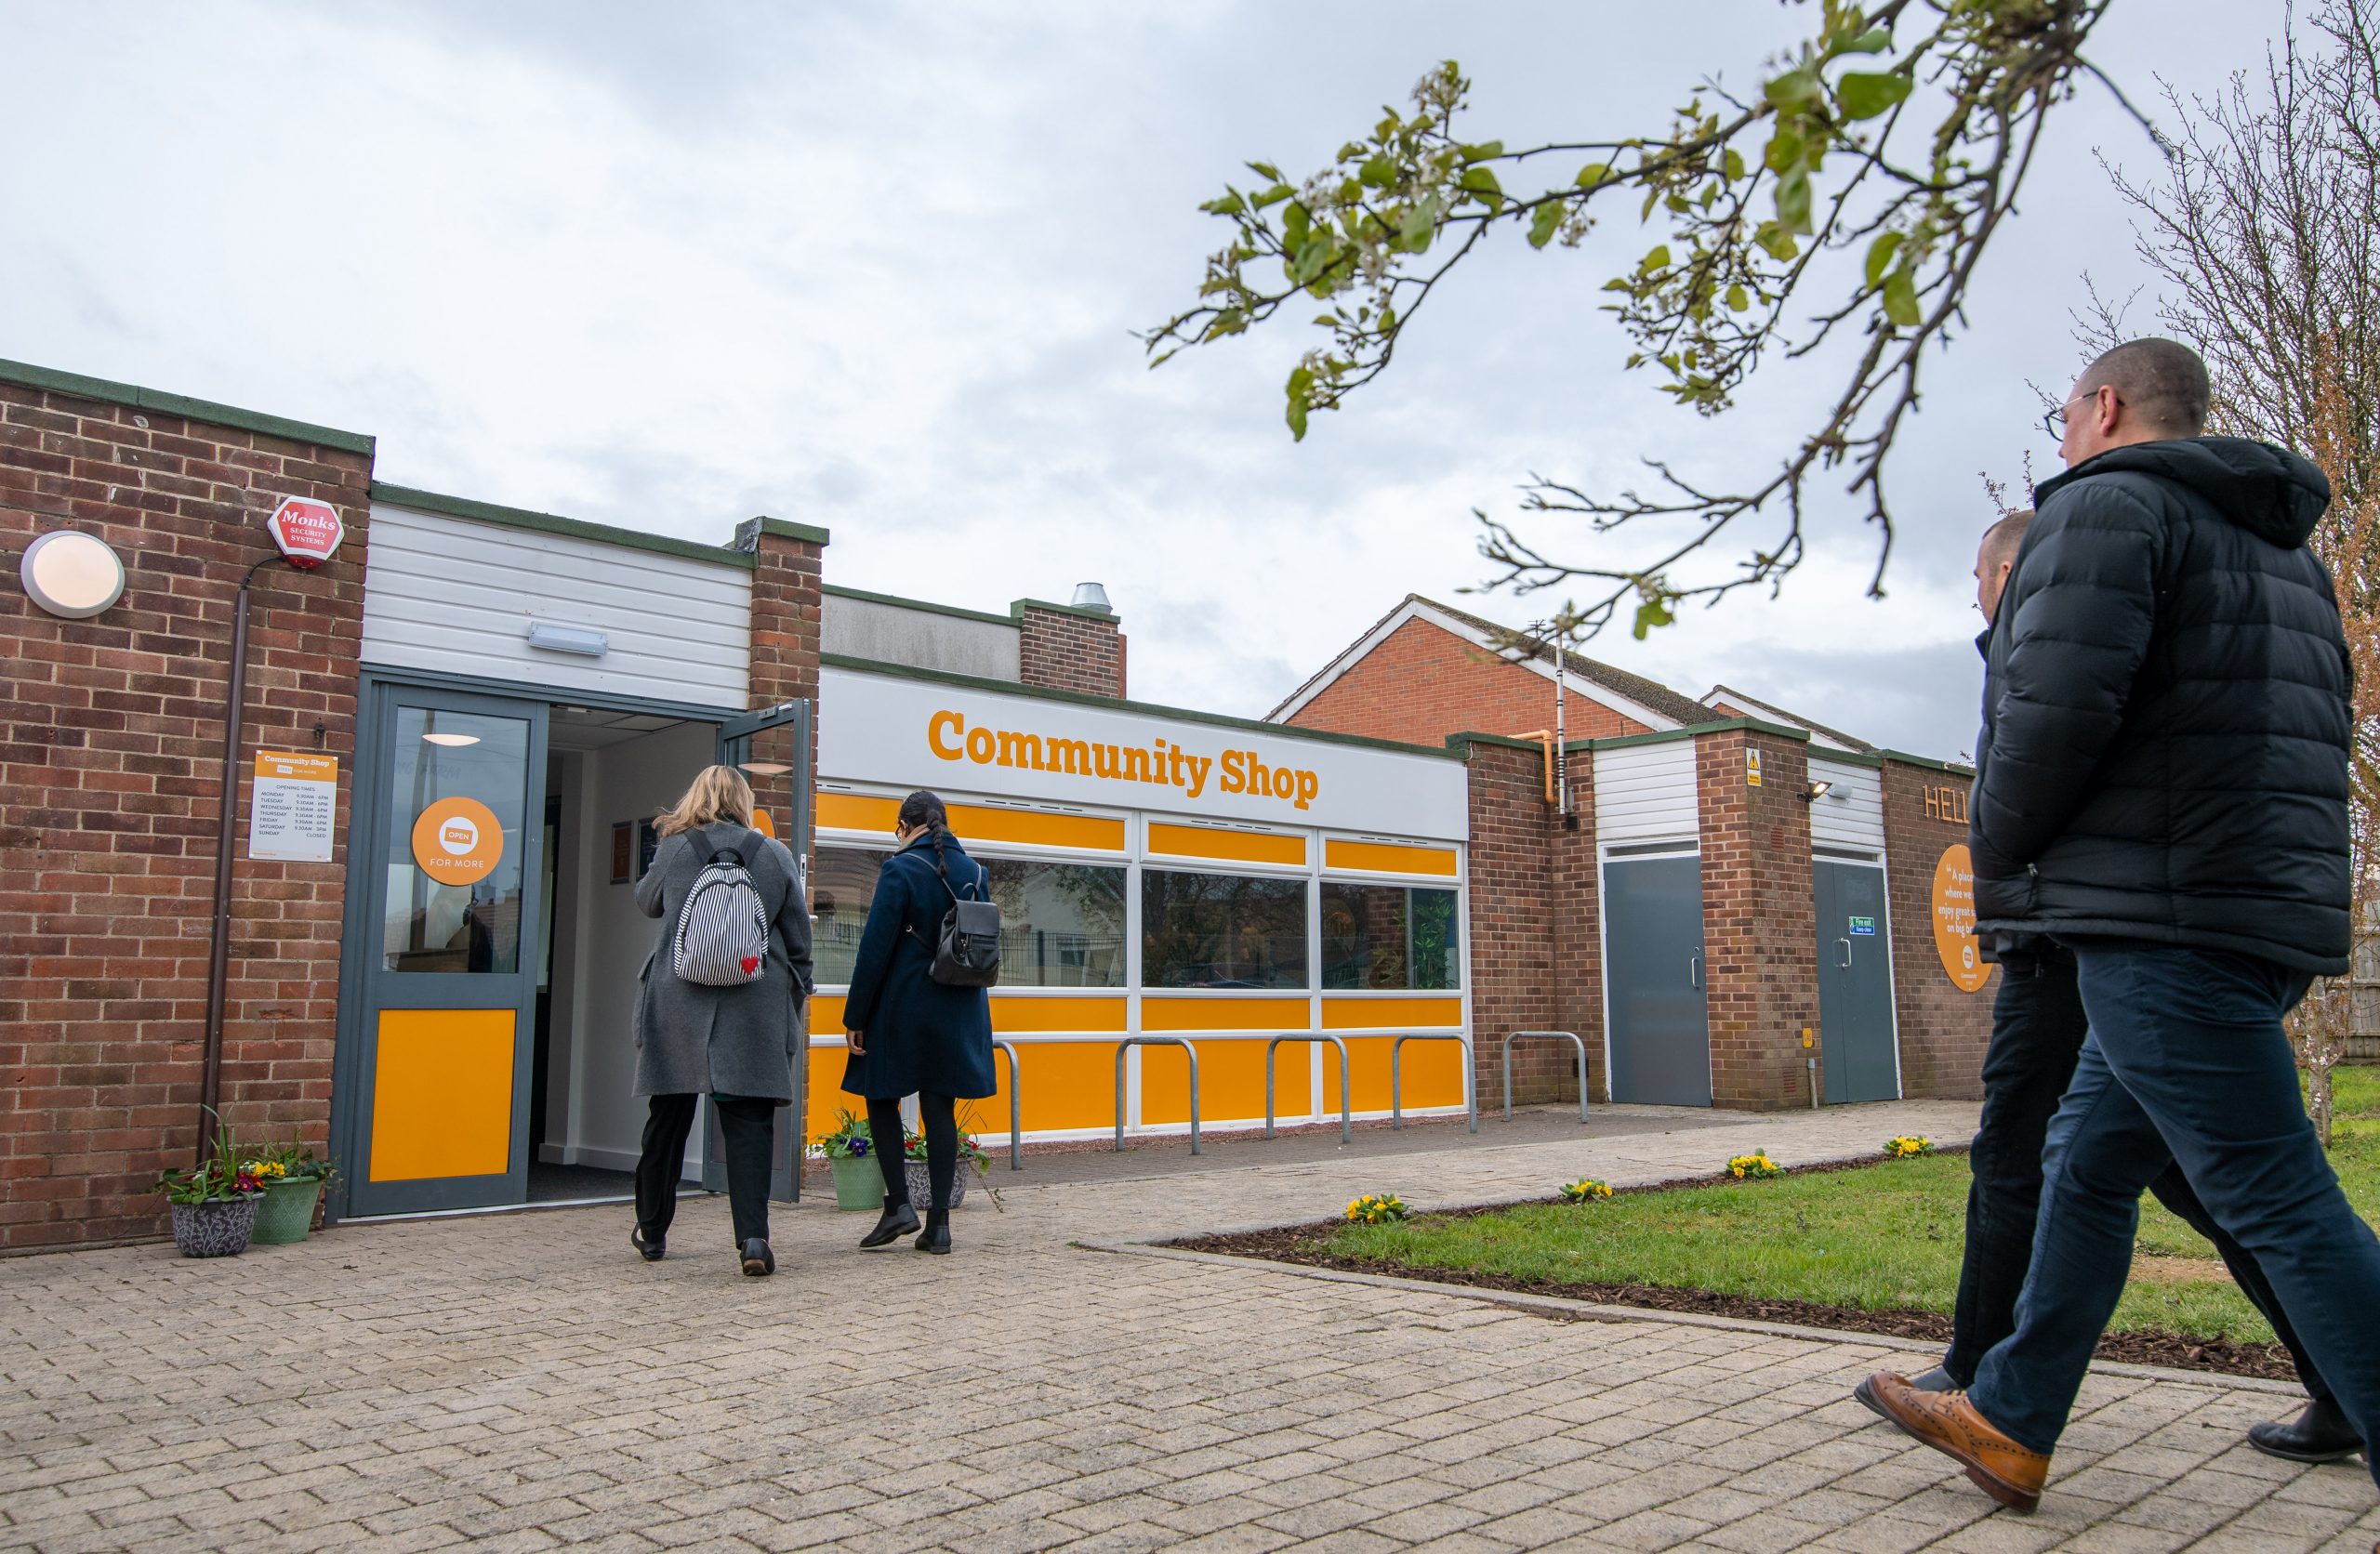 McCain announces opening of Community Shop to support local community